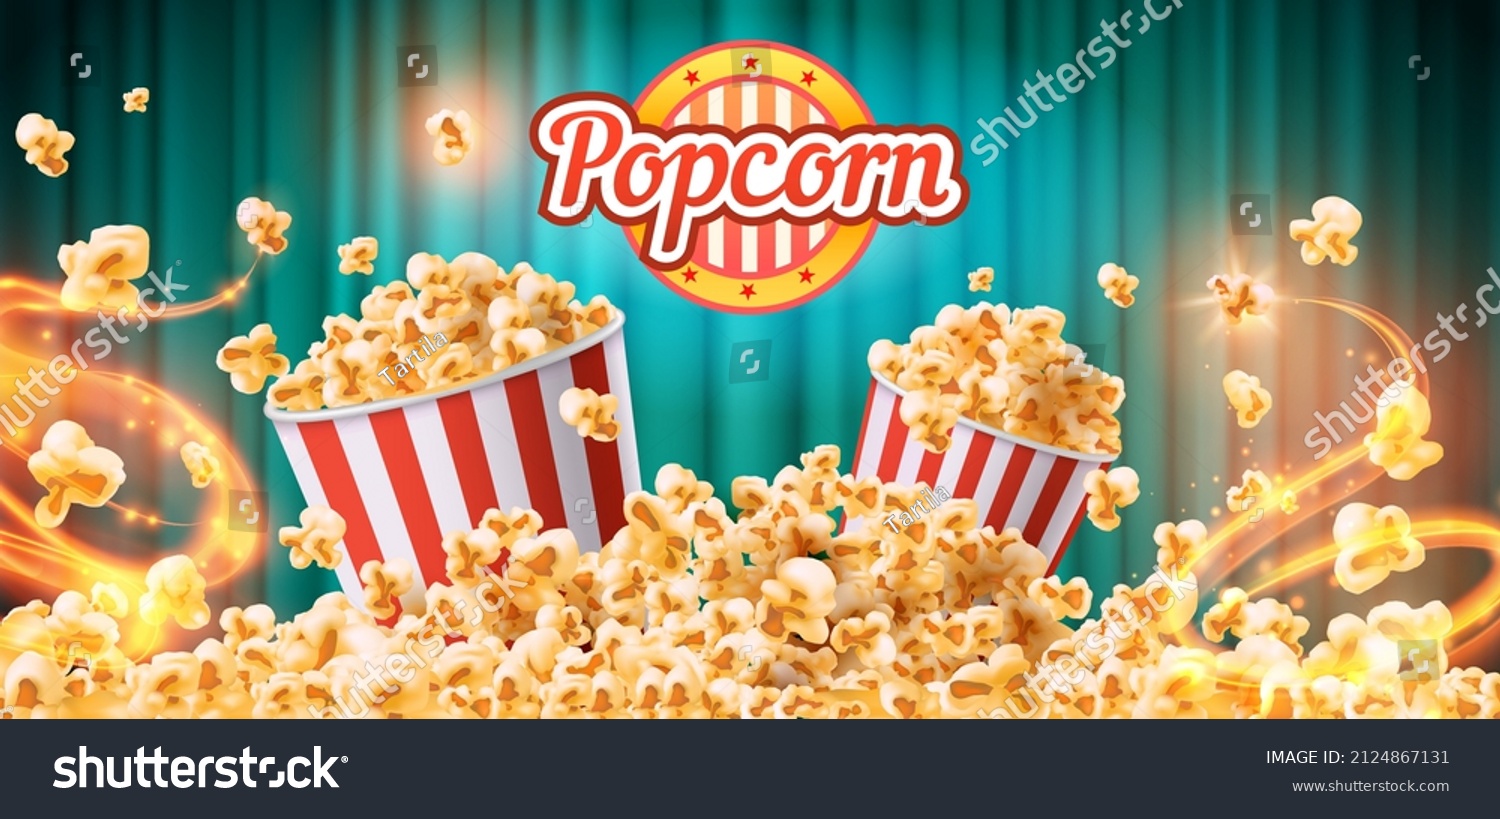 Crunchy popcorn snack ad poster with striped buckets and grains. Sweet or salt cinema food commercial. Flying tasty popcorn vector banner. Pop corn for cinema, delicious tasty snack illustration #2124867131